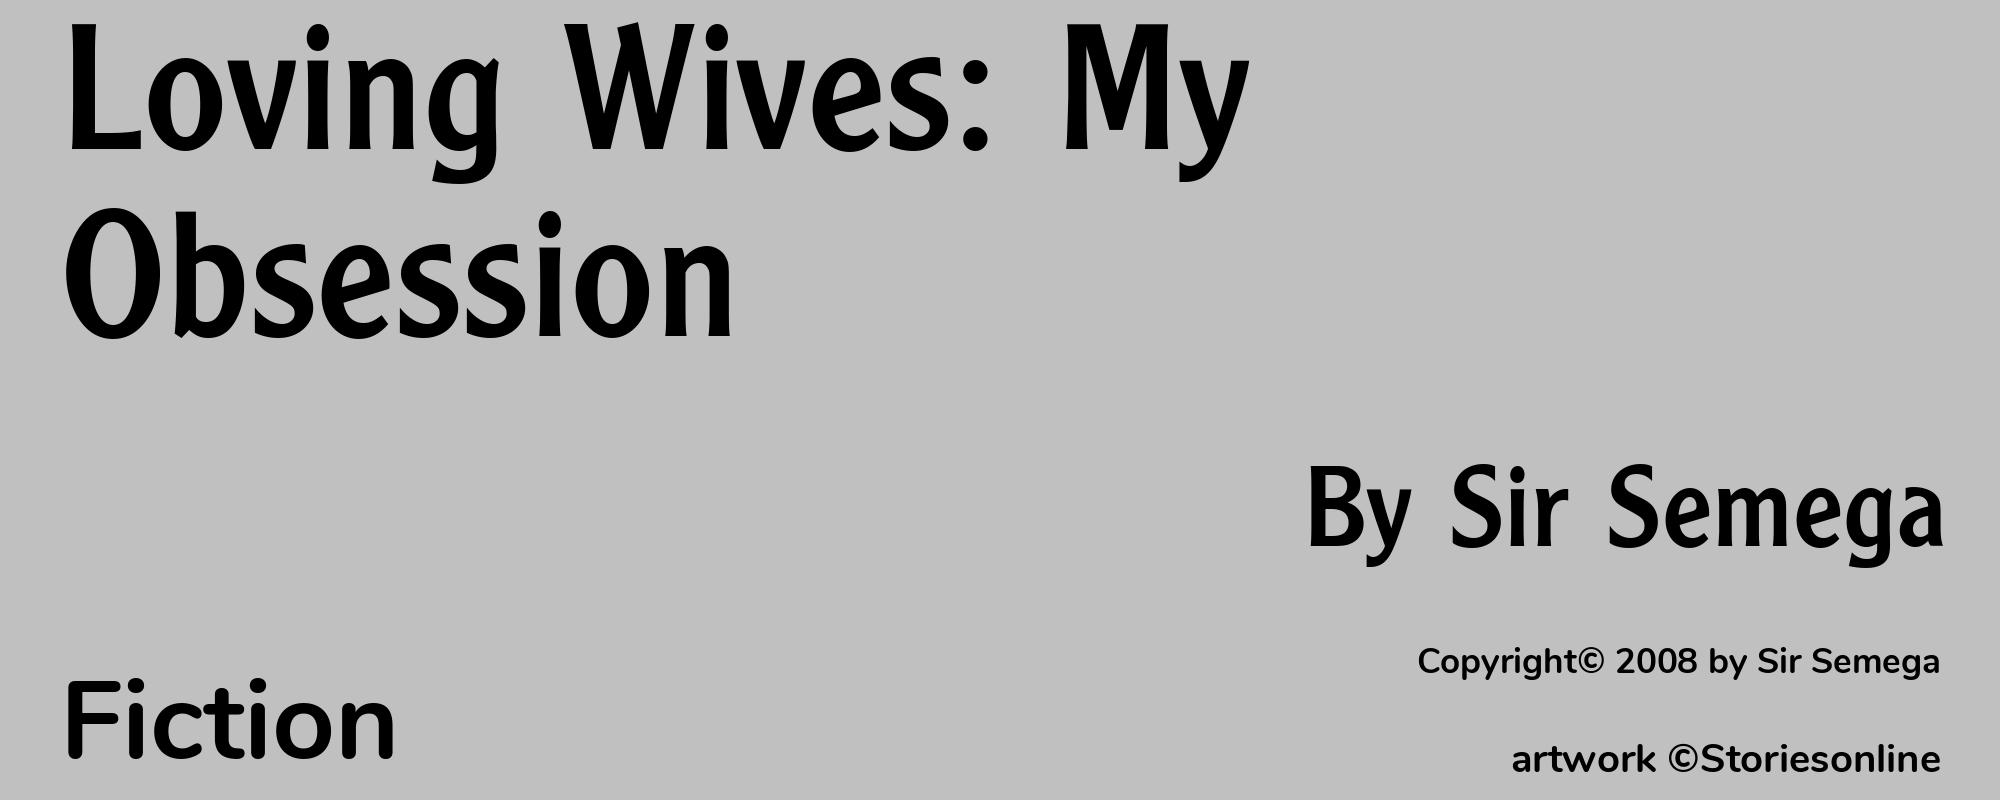 Loving Wives: My Obsession - Cover